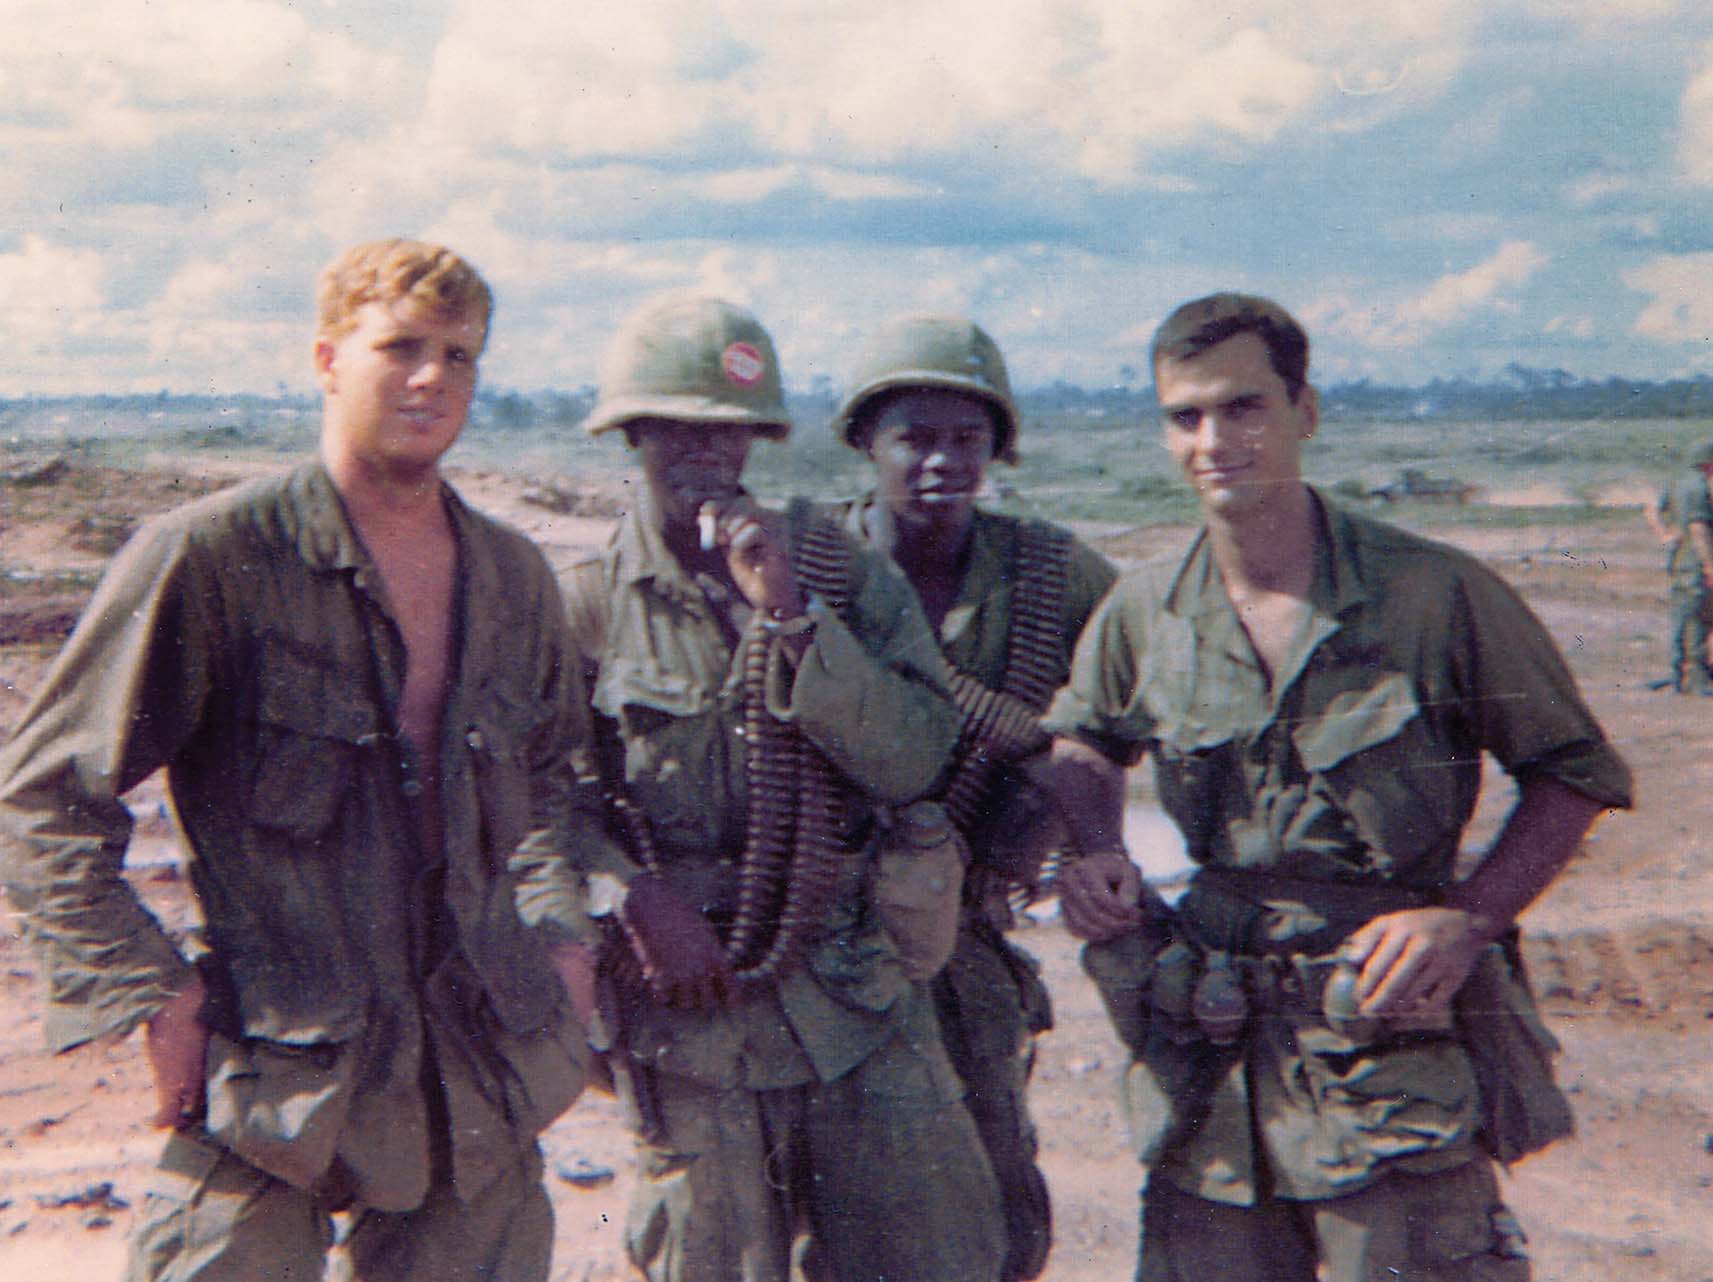 Two days after the April 24, 1968, battle, the author, at left, with platoon members (from left) Spc. 4 Al Dunn, Pfc. James Proctor, Spc. 4 Alan Fugit / Courtesy photo